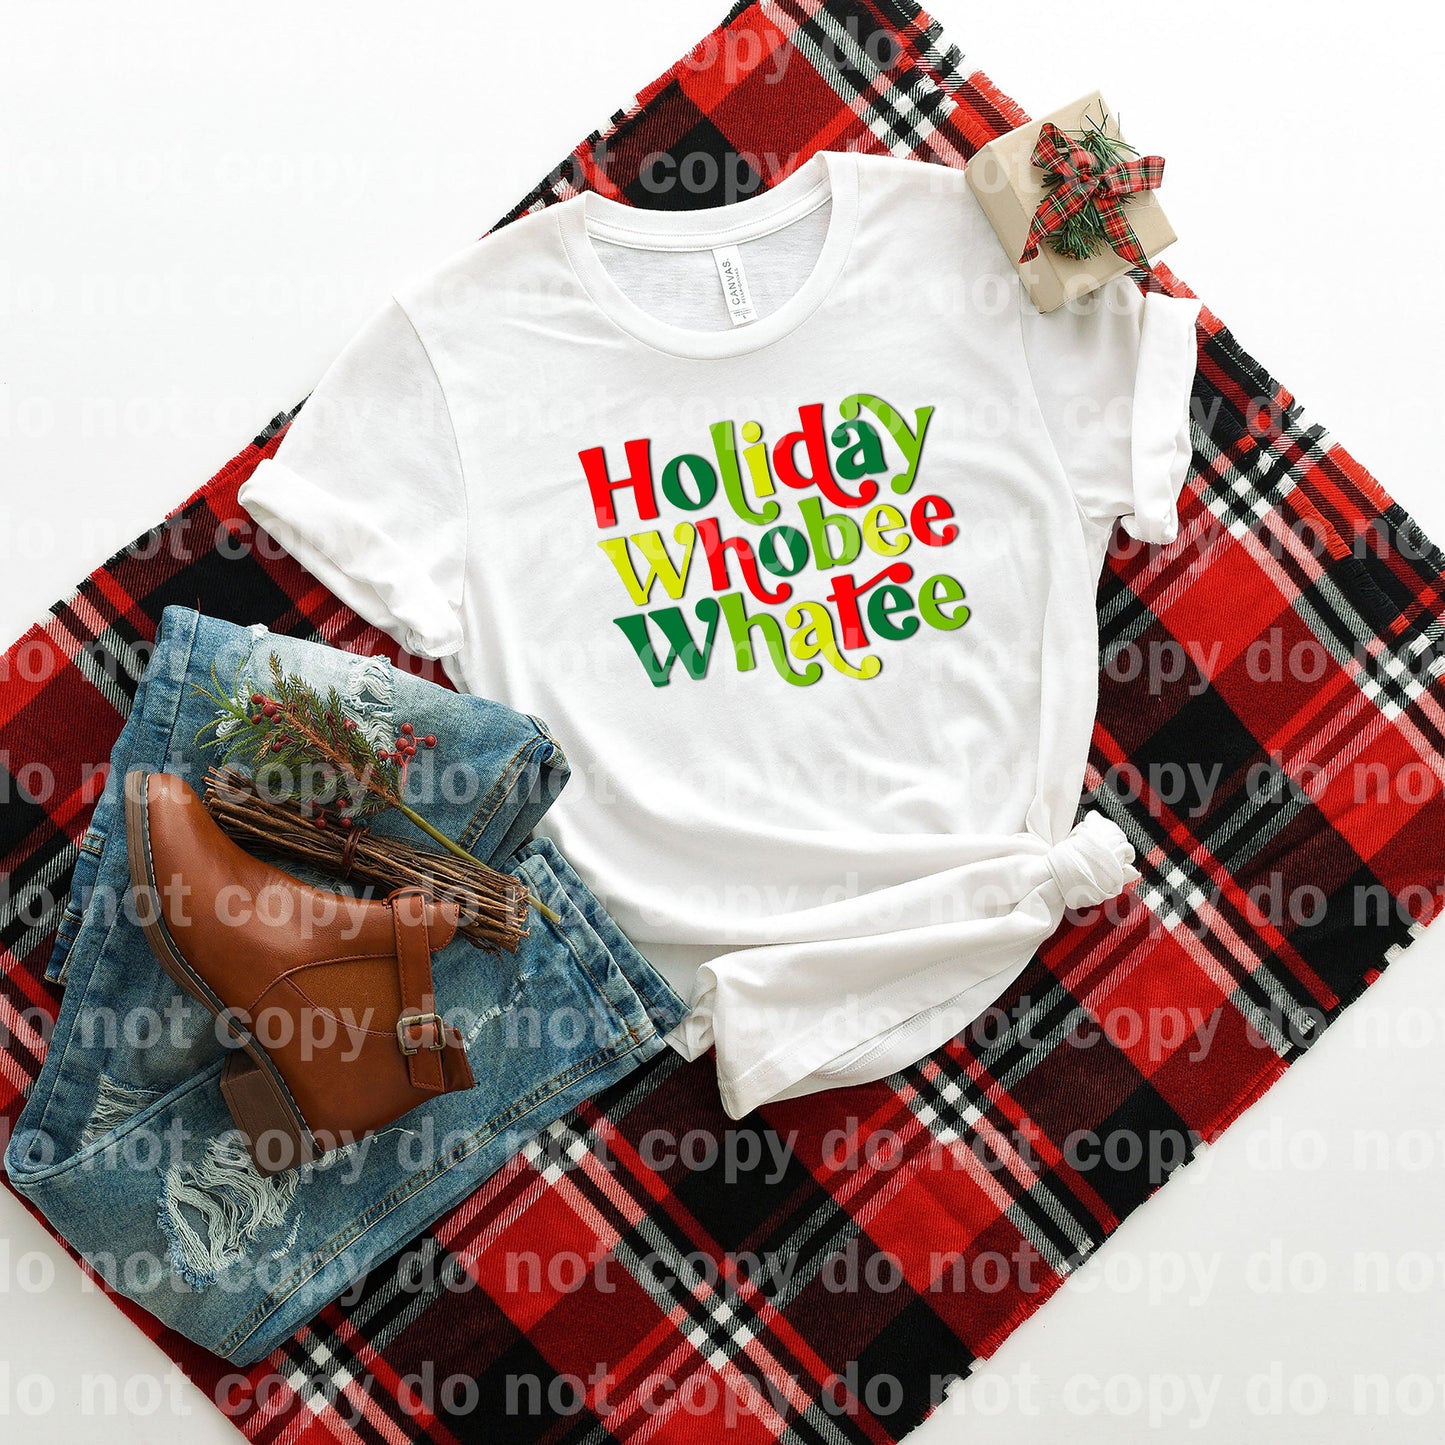 Holiday Whobee Whatee Dream Print or Sublimation Print